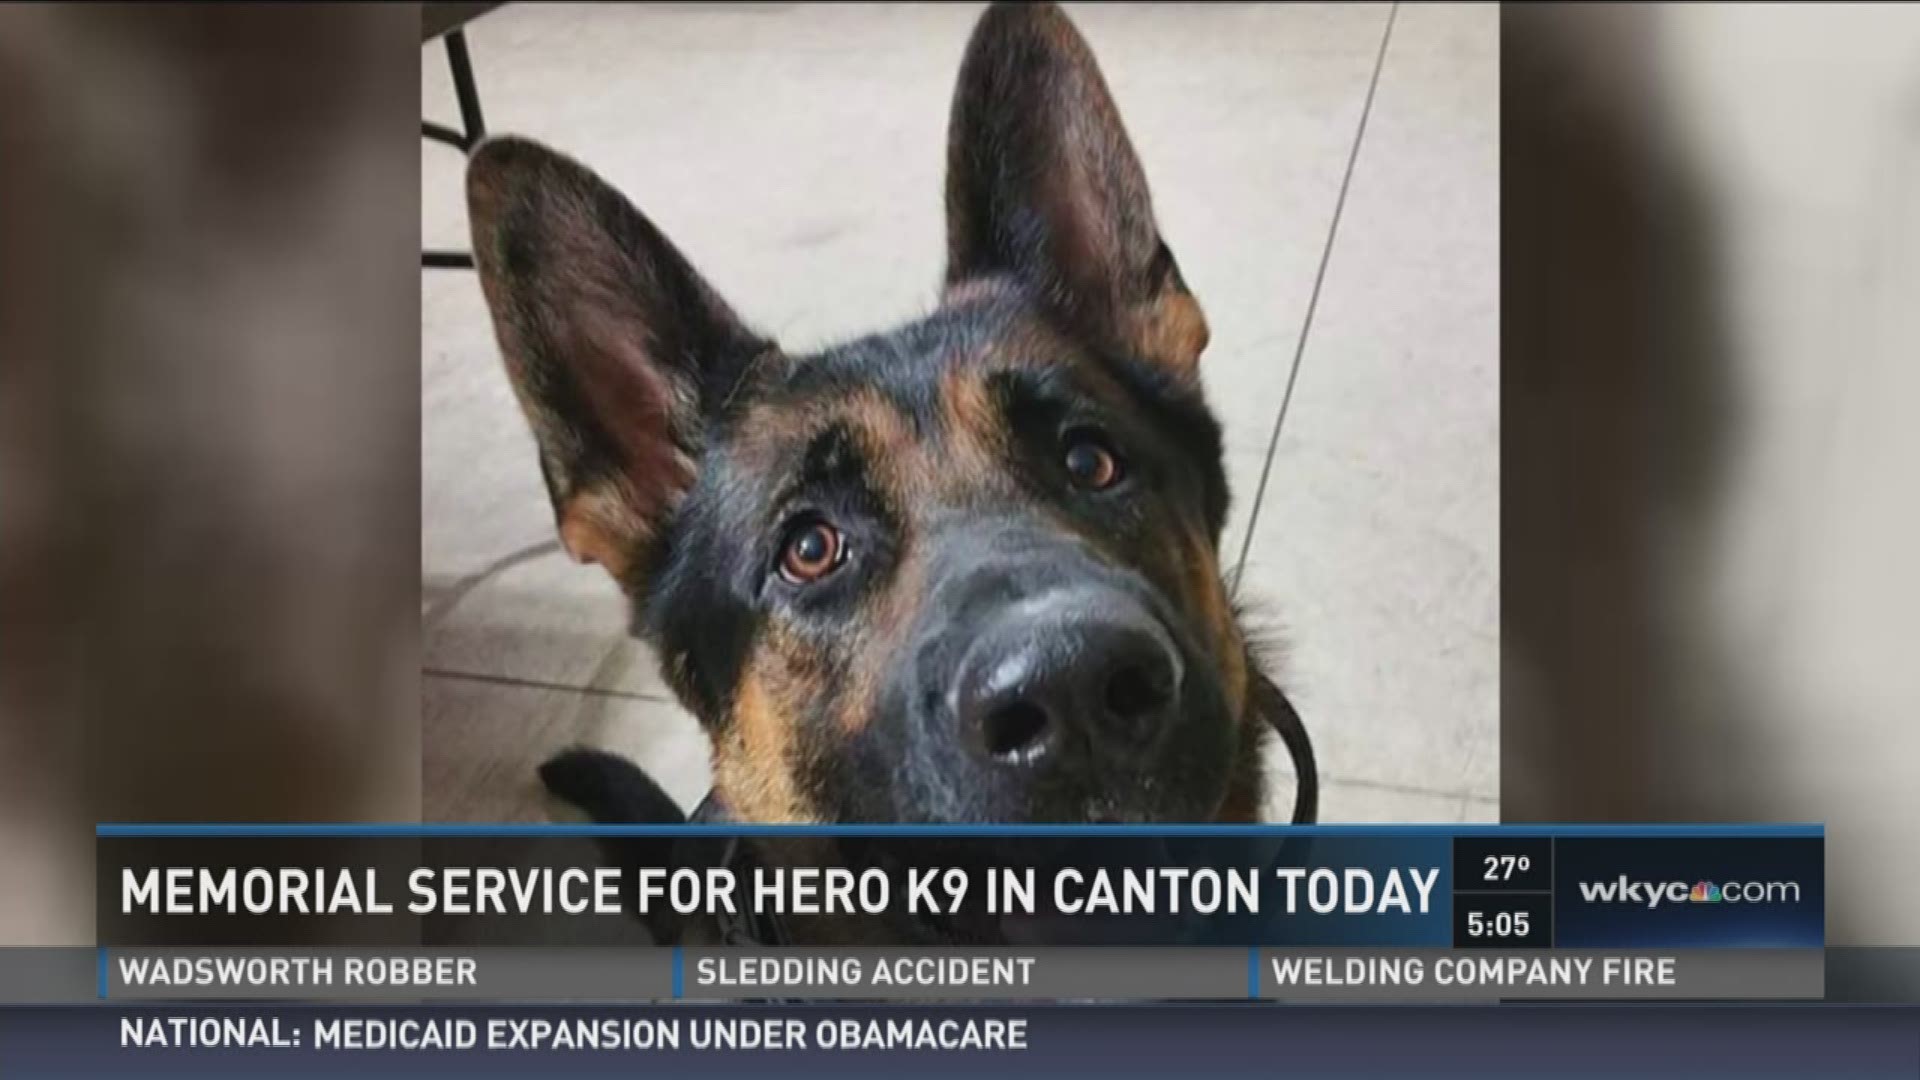 Jan. 14, 2016: A memorial service will be held today for Jethro, the Canton K-9 killed in the line of duty. WKYC's Tiffany Tarpley has the story. Be sure to follow @TiffanyTarpley on Twitter for loads more daily news updates.